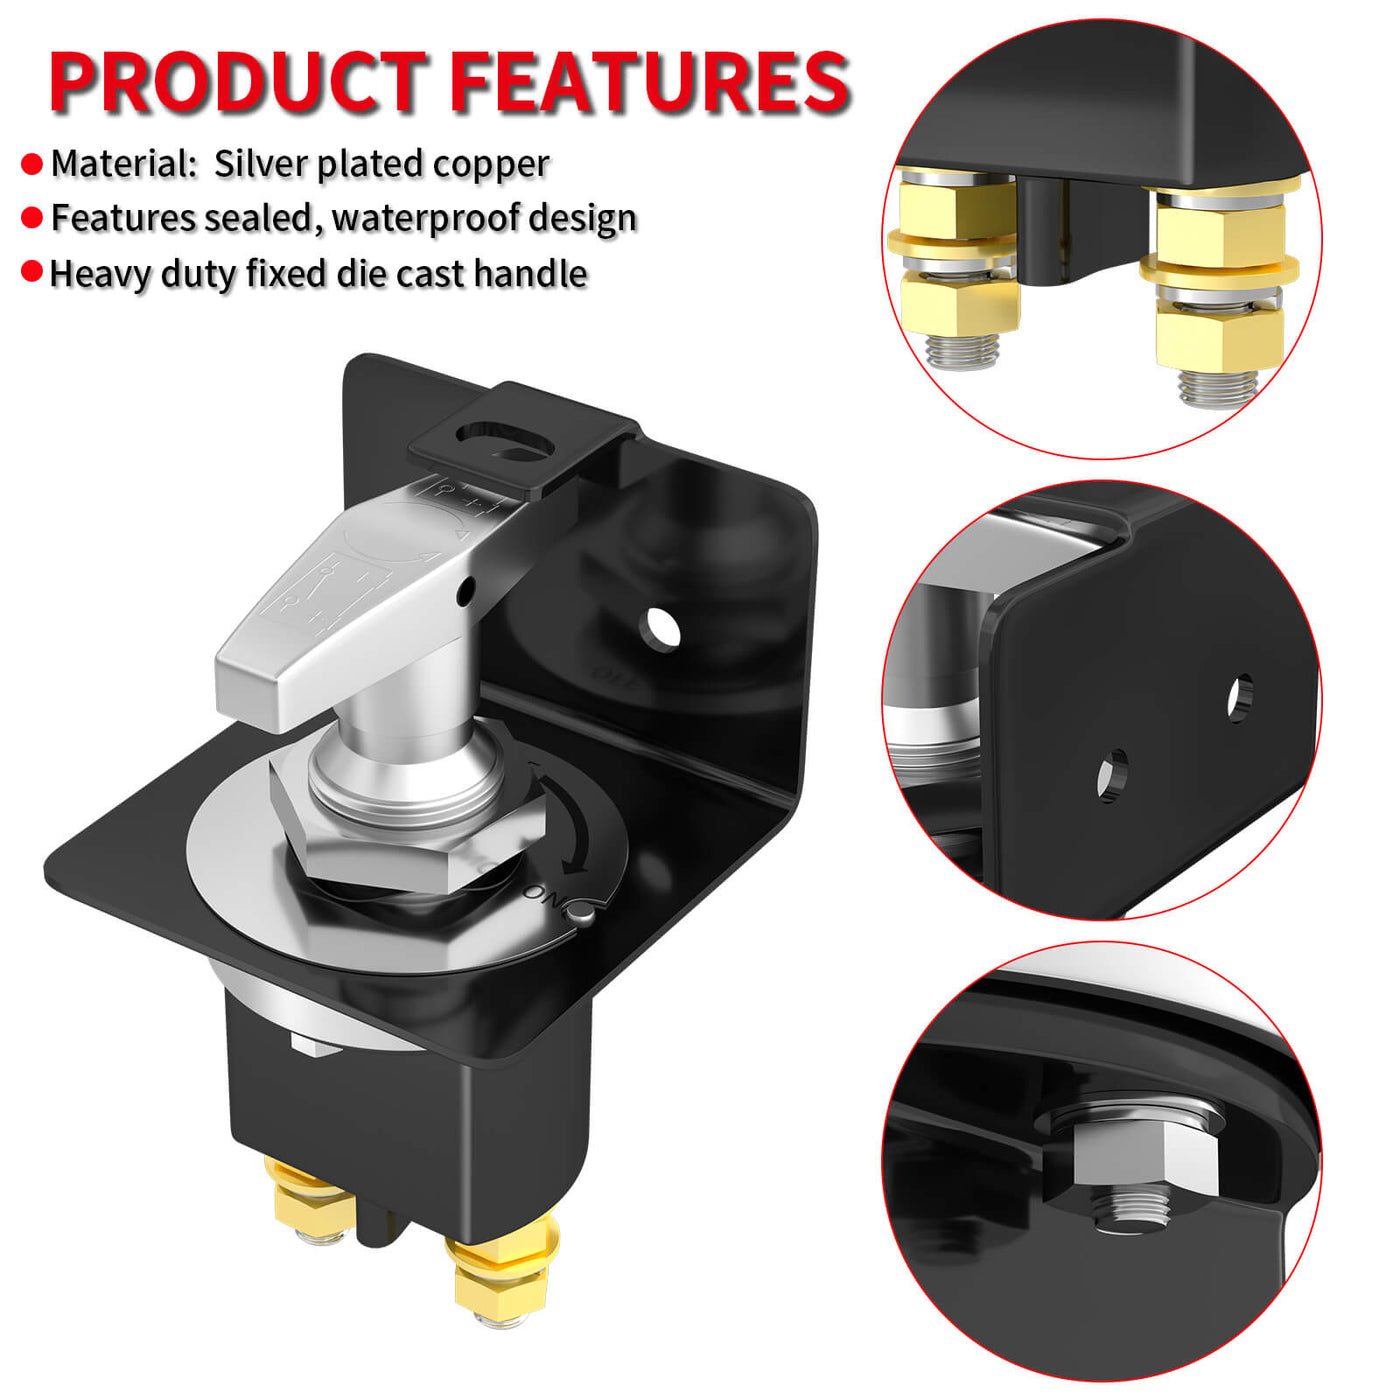 Kill Switch with Lock-out Plate Battery Disconnect Switch product features